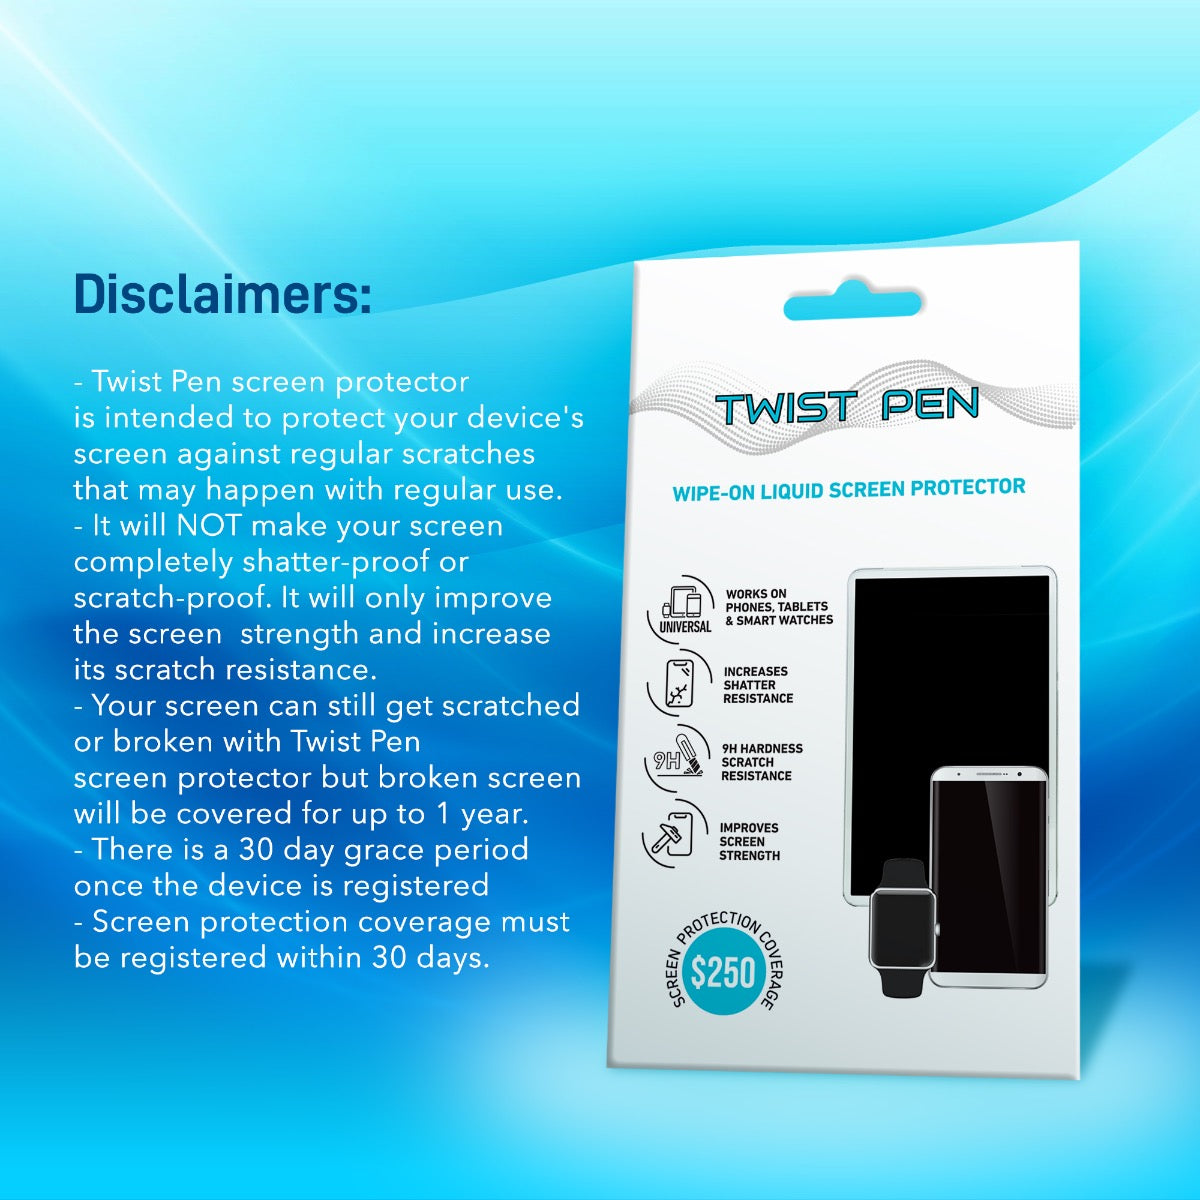 TWIST PEN Liquid Glass Screen Protector with $250 Coverage for All Devices